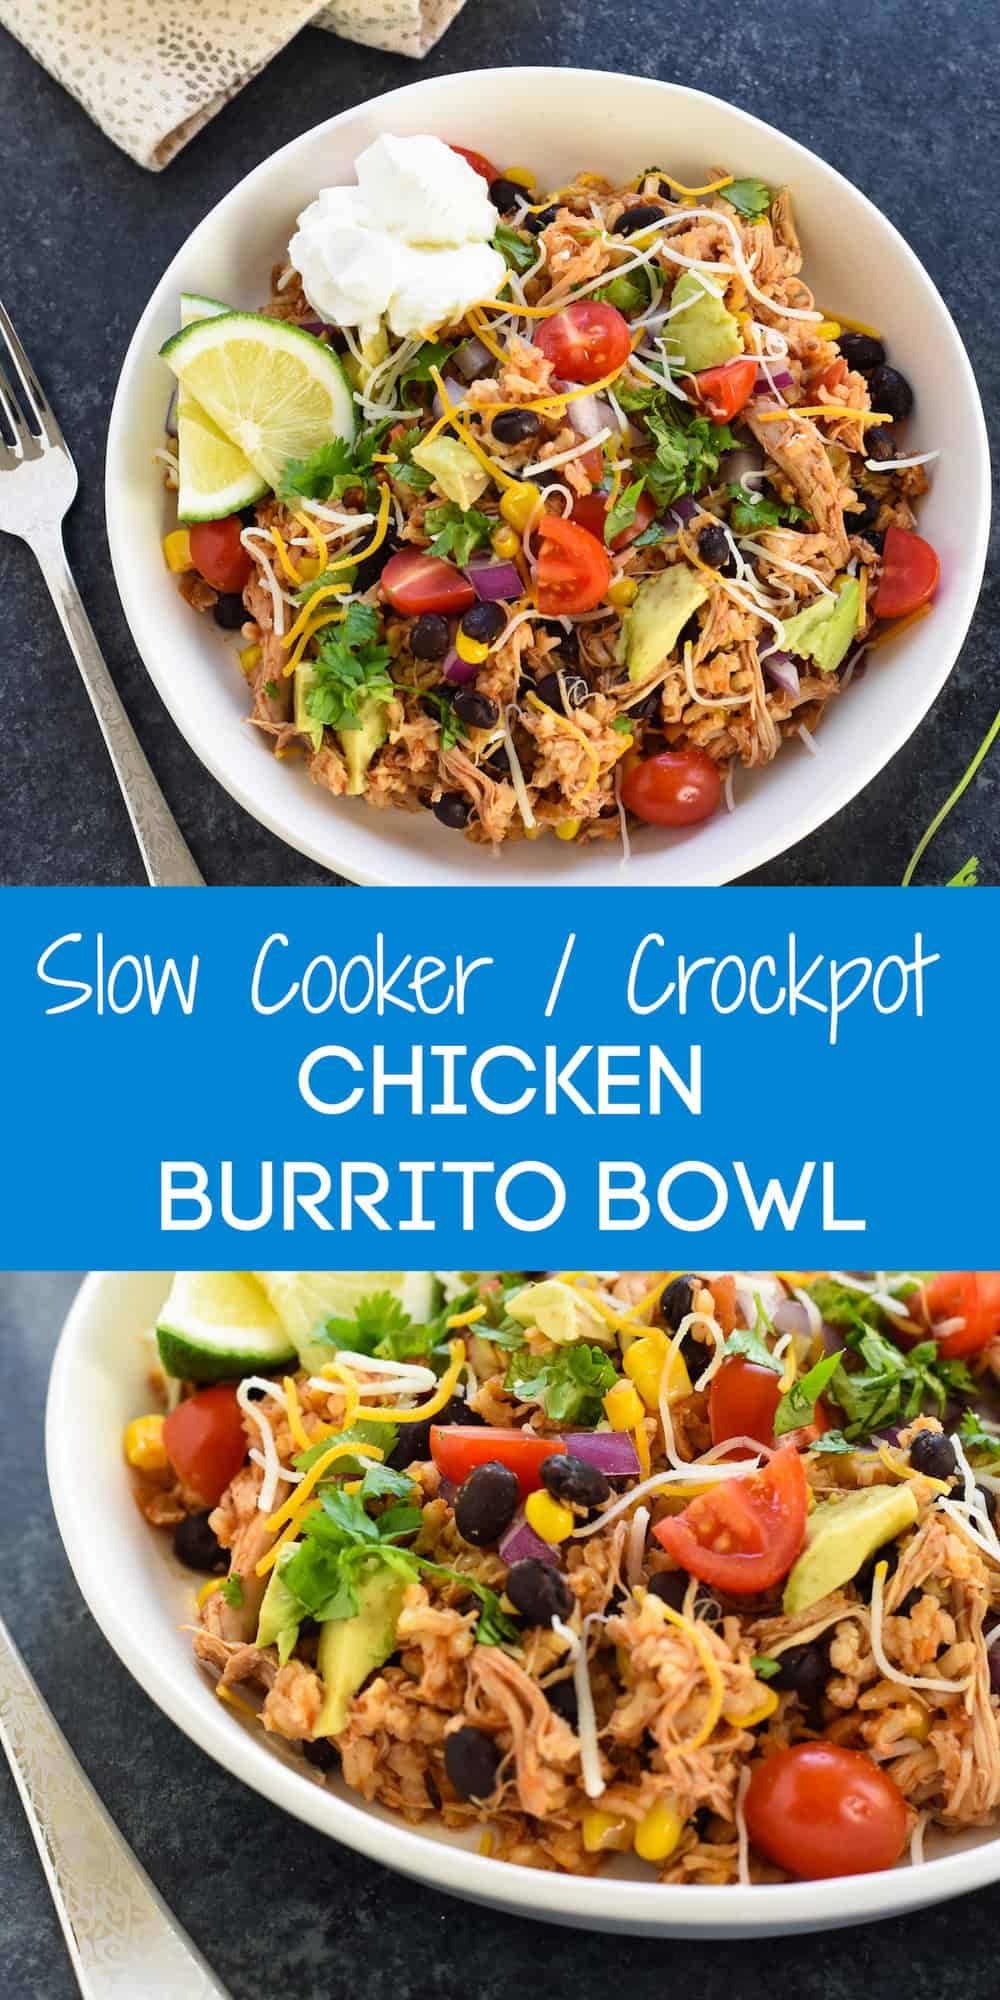 Collage of images of slow cooker chicken bowl meal with overlay: Slow Cooker / Crockpot CHICKEN BURRITO BOWL.